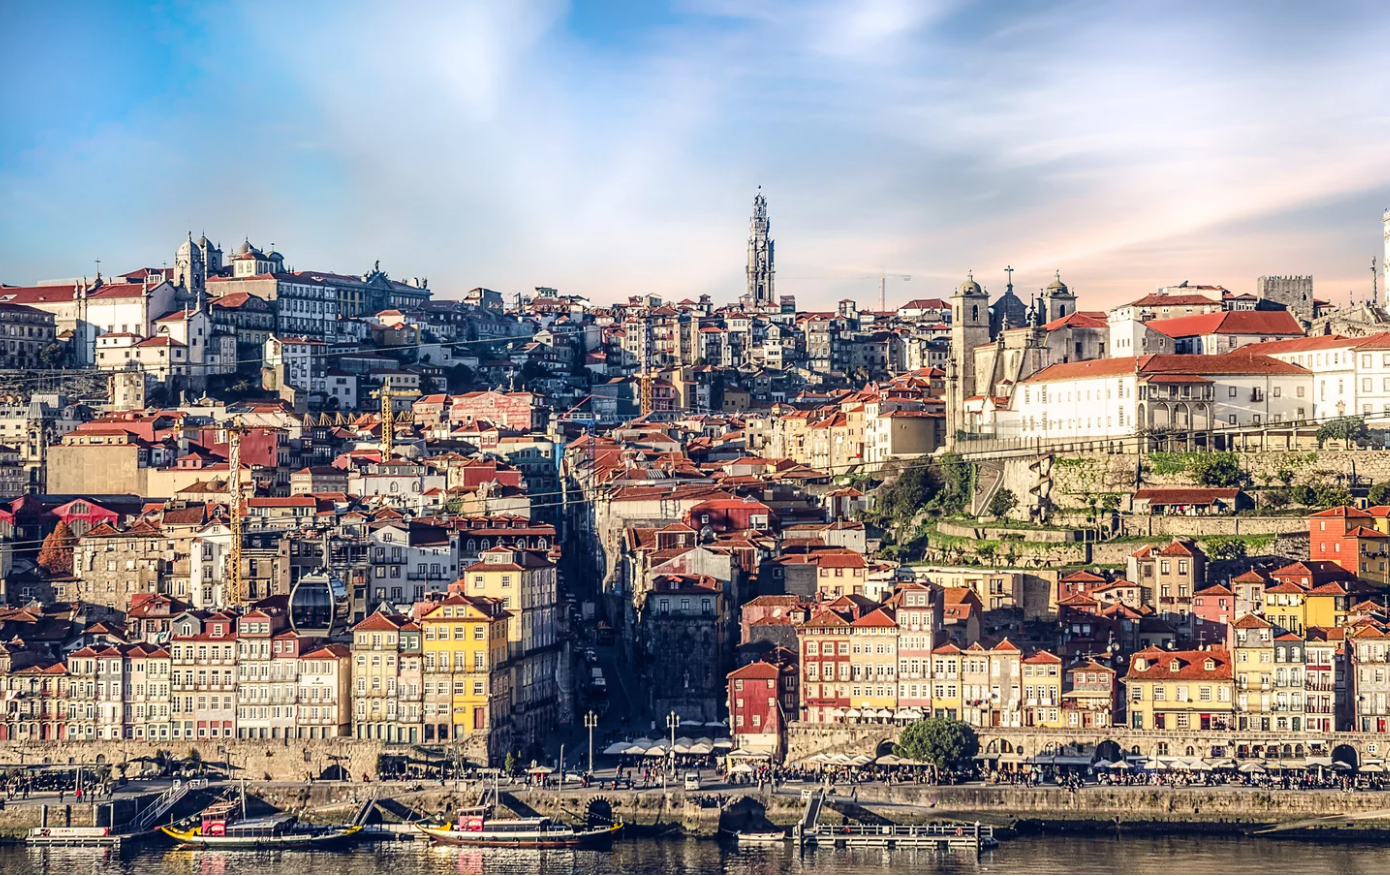 Find out why you should visit the beautiful city of Porto